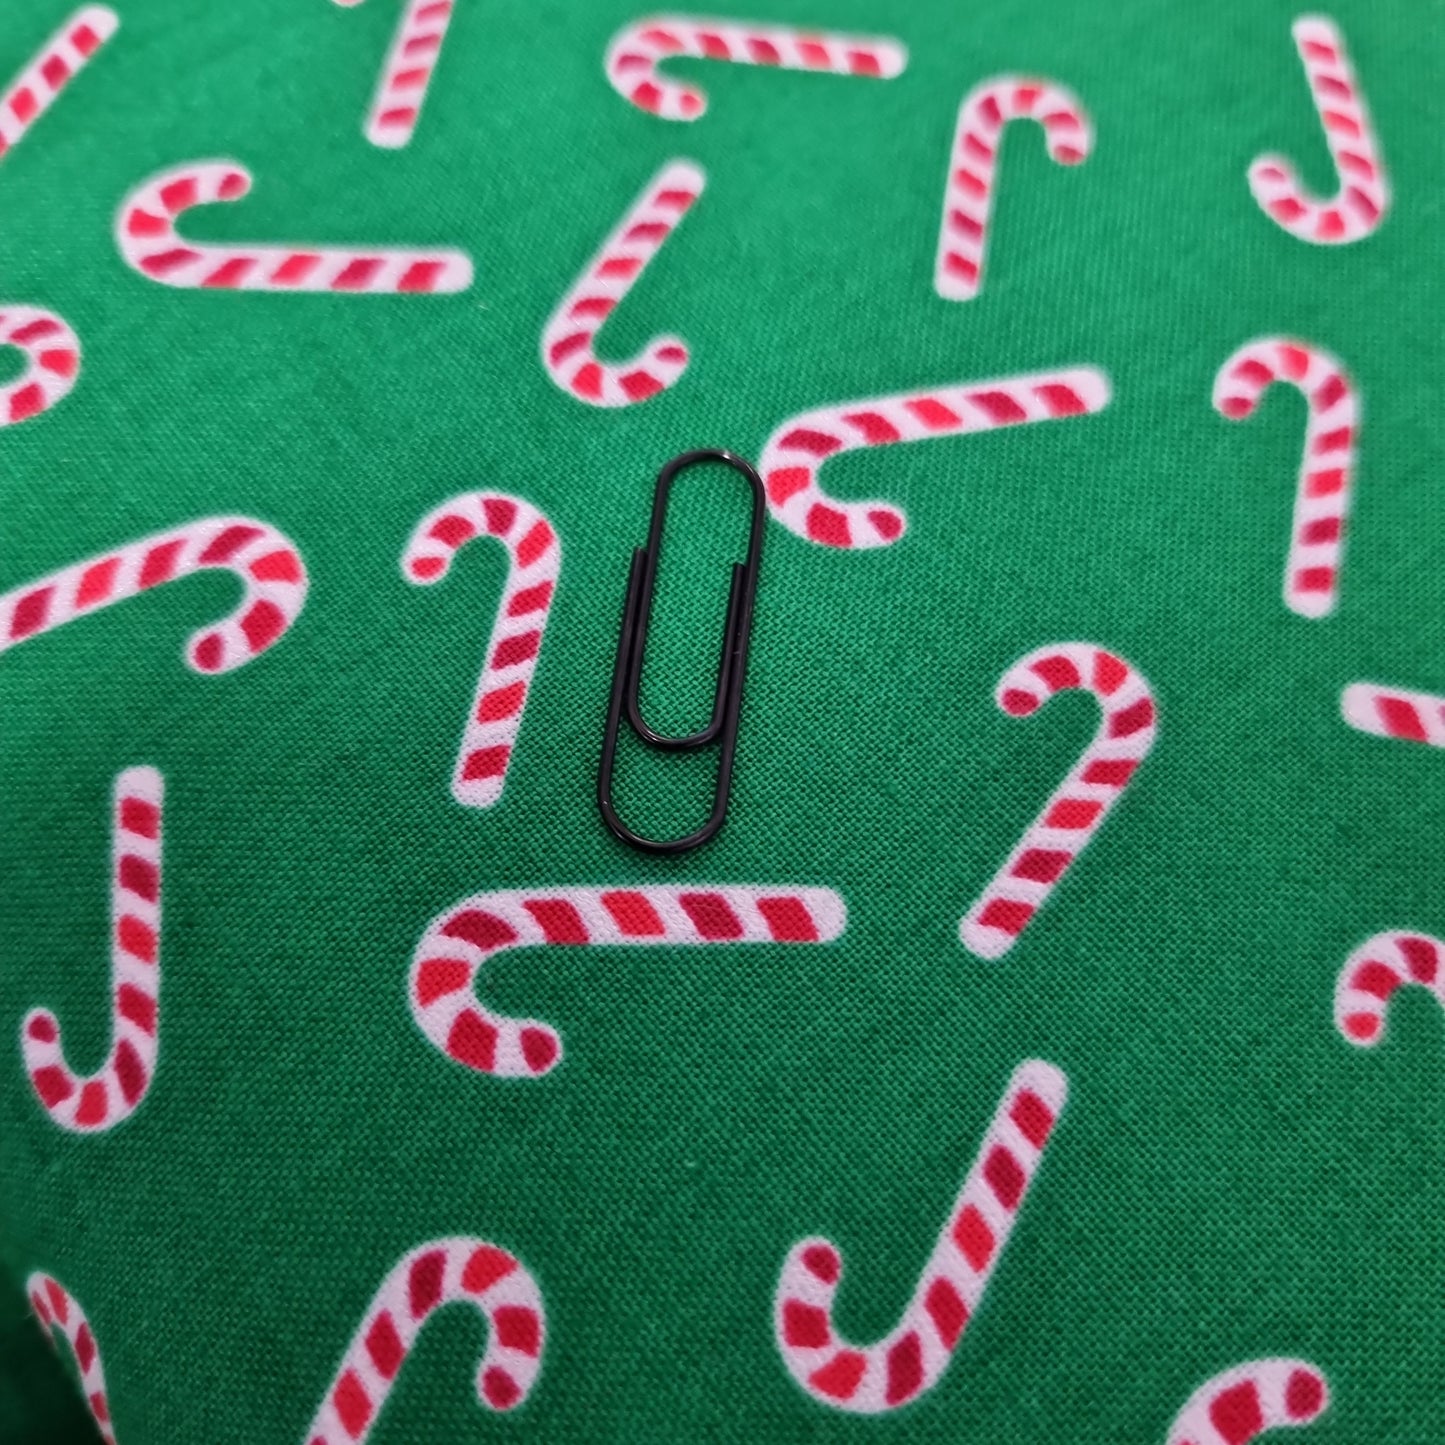 Candy canes on green